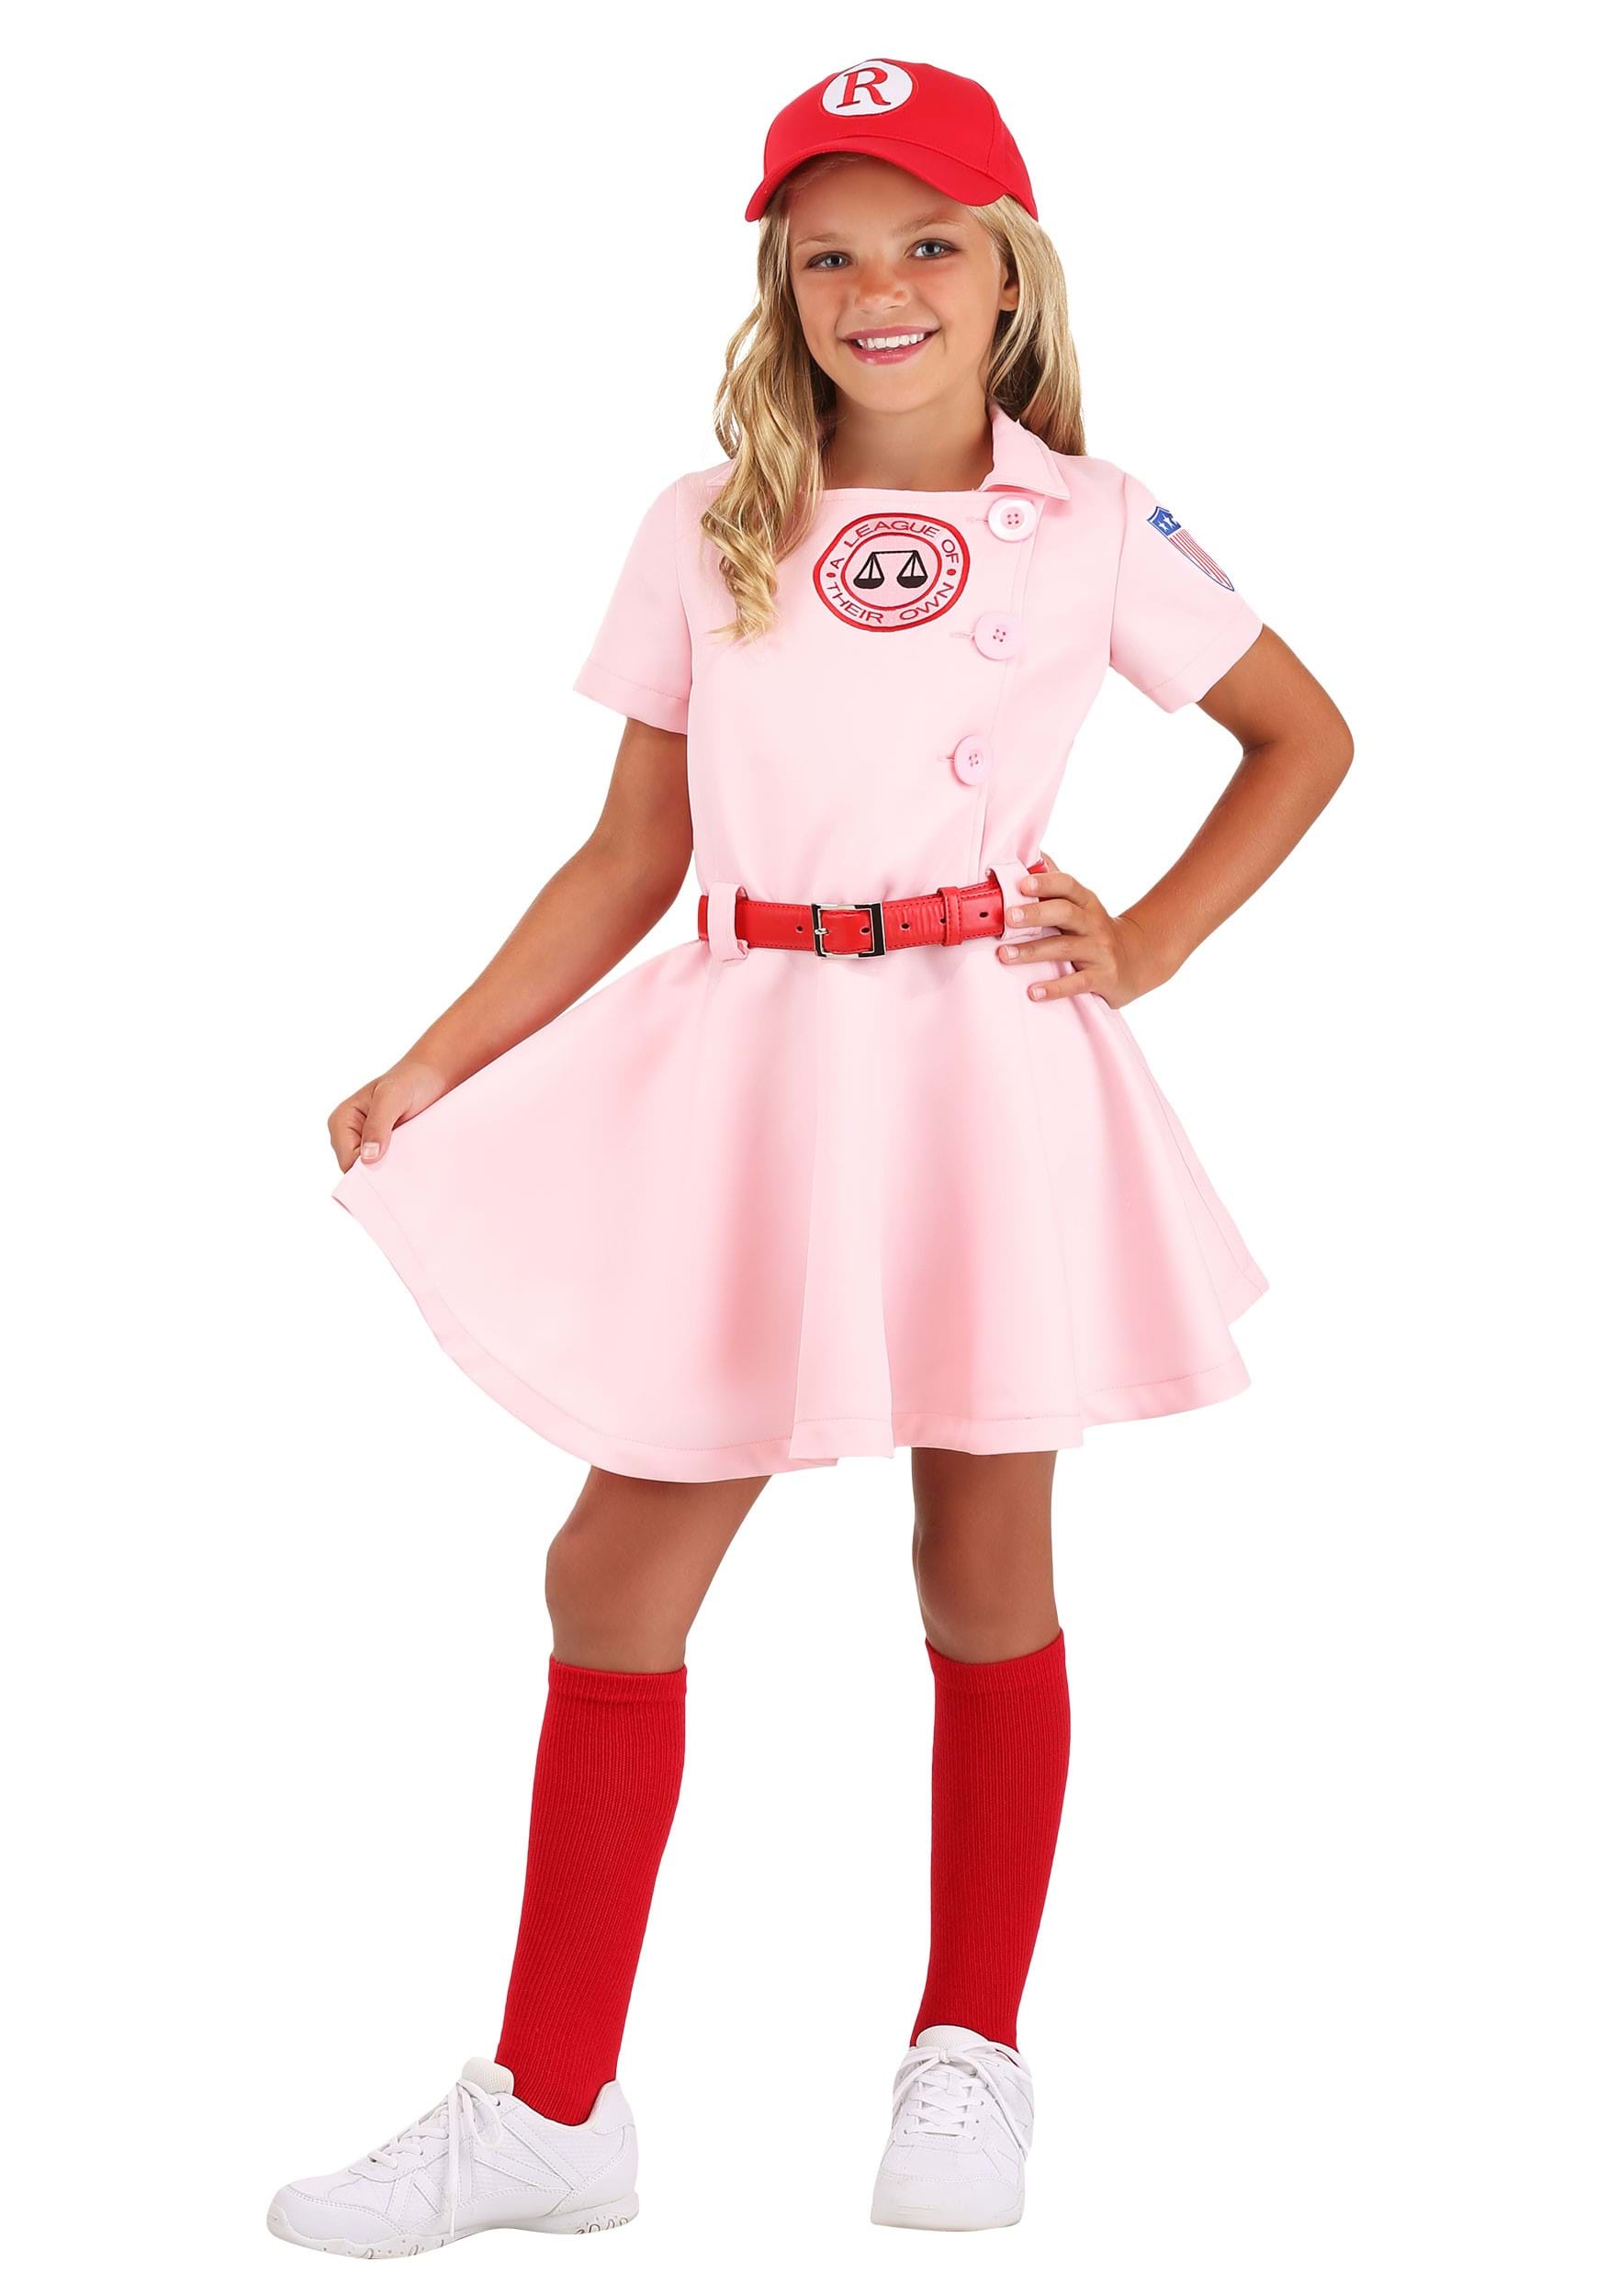 Photos - Fancy Dress League FUN Costumes  of Their Own Luxury Child Dottie Costume for Girls Pin 